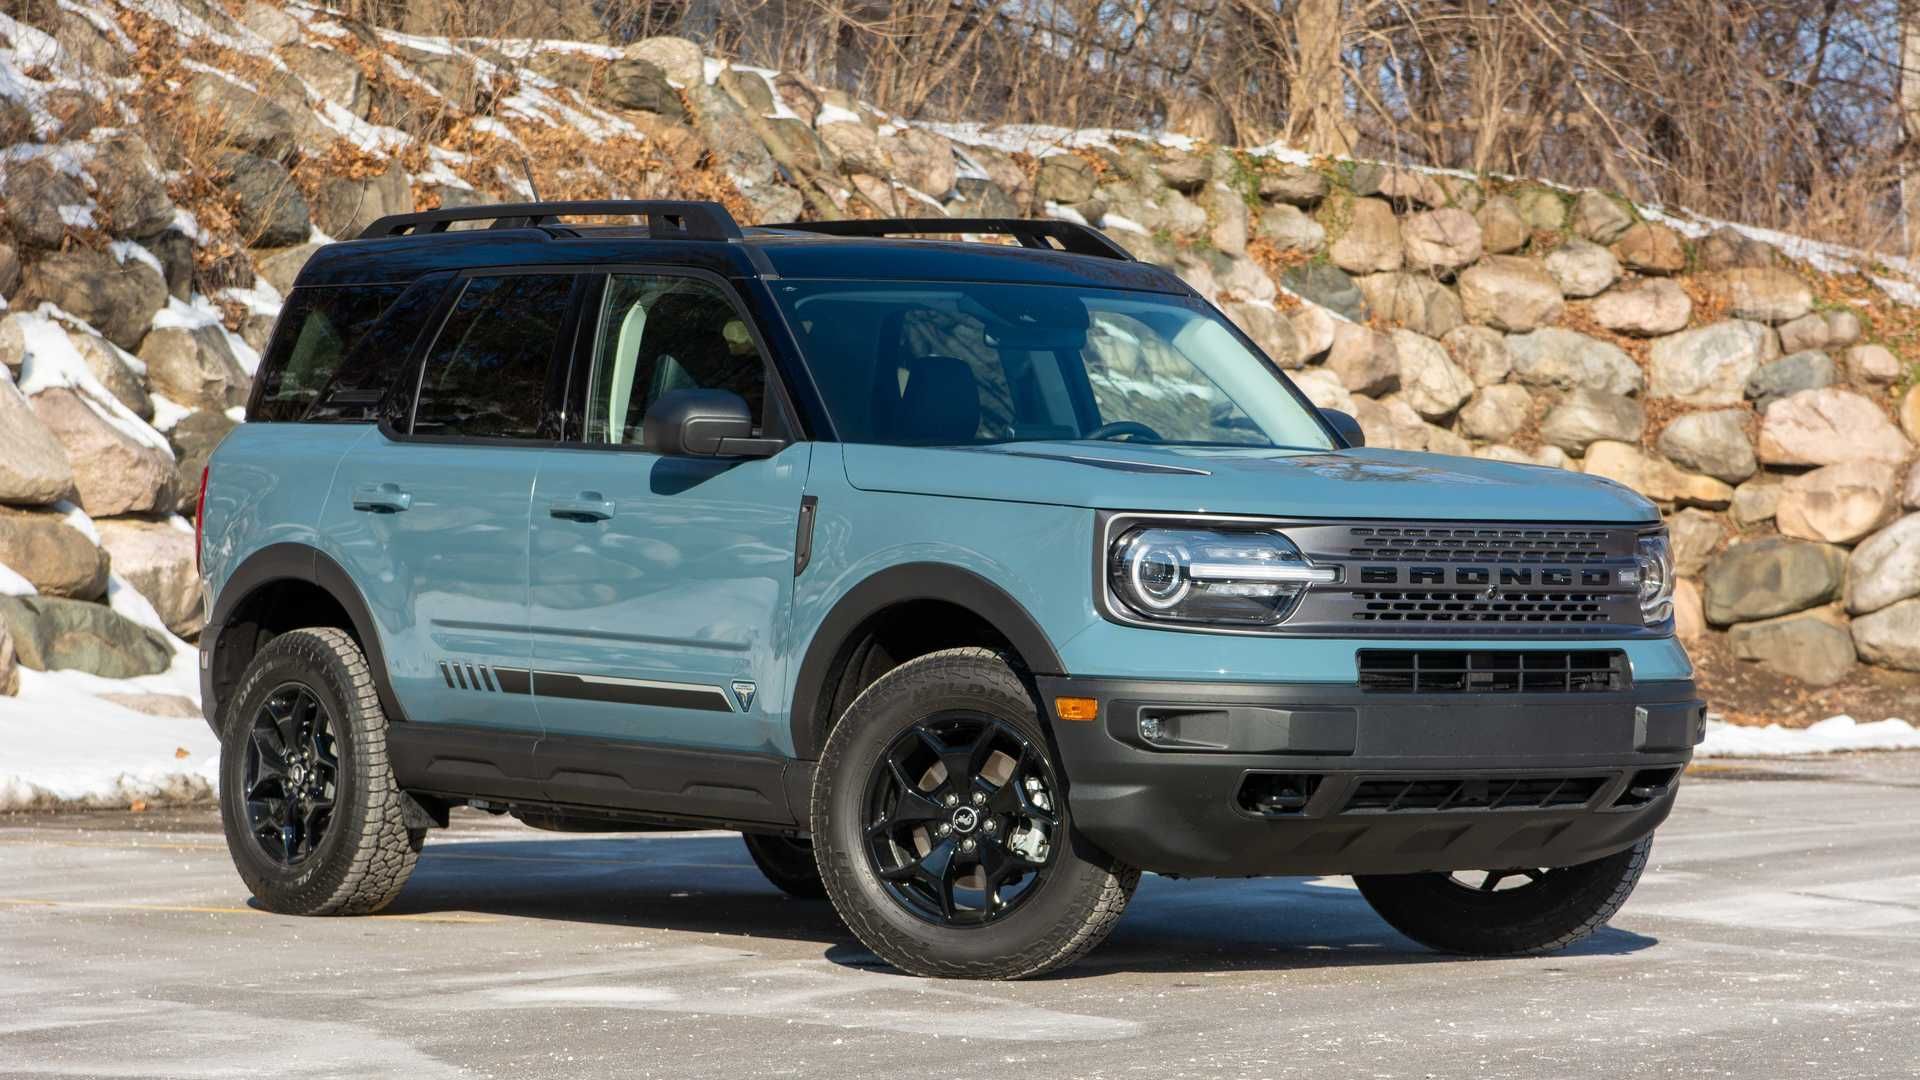 2021 Ford Bronco: The off-road SUV that can survive in the urban jungles.